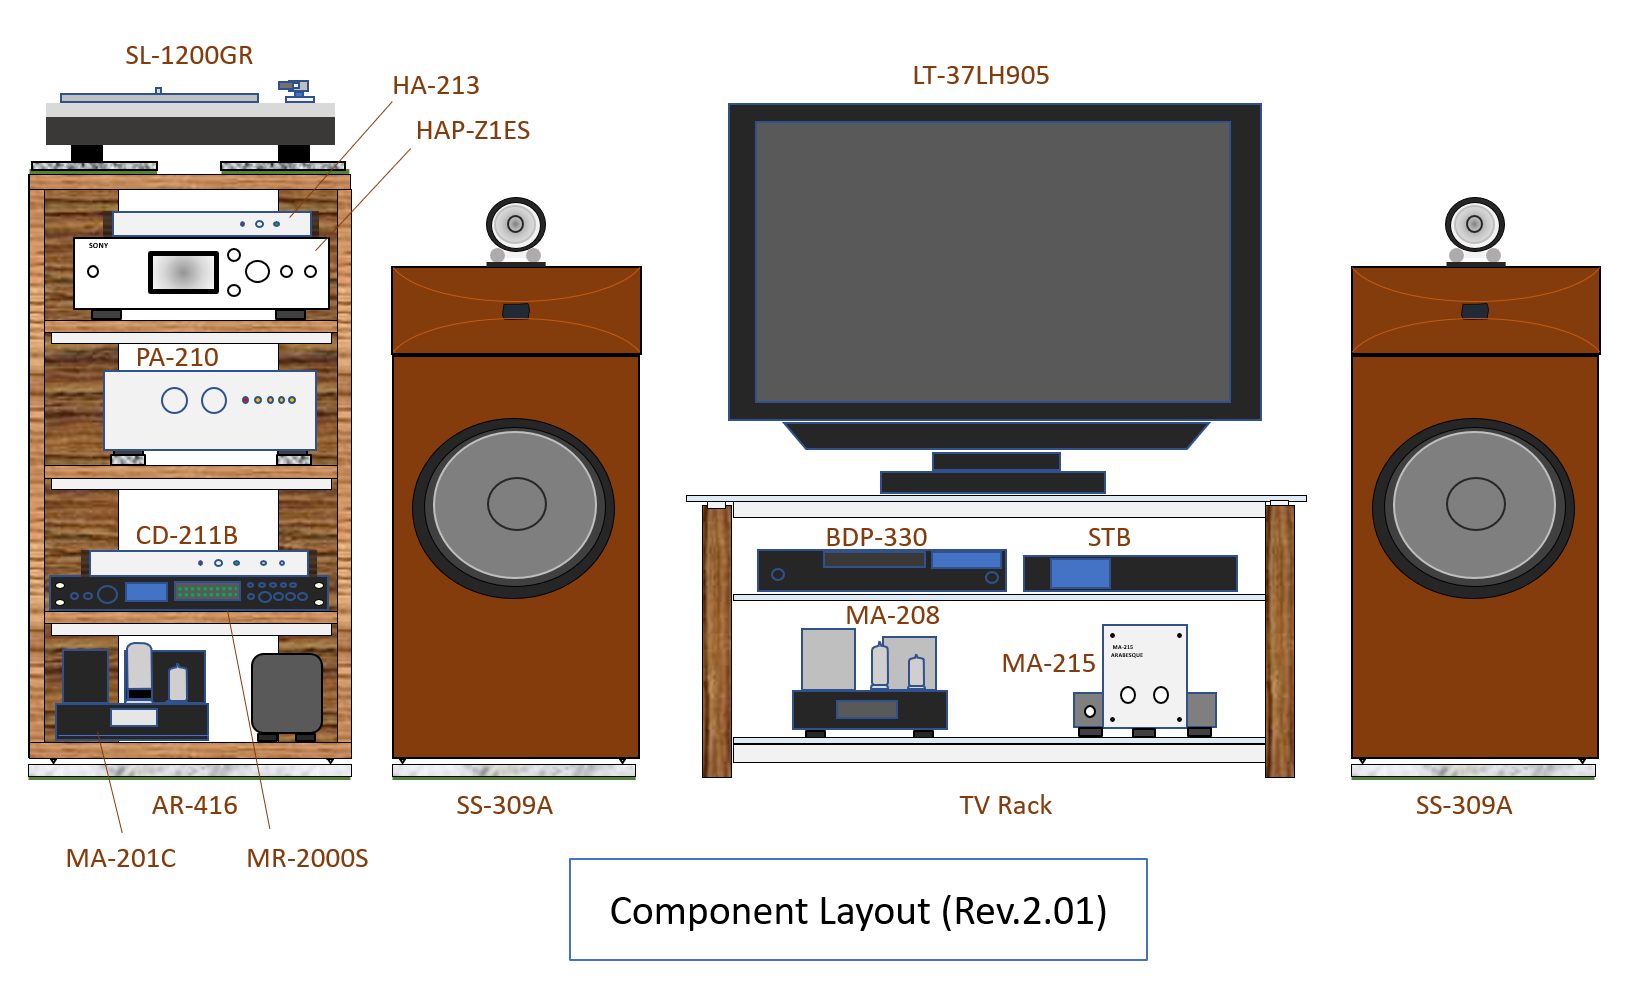 Component Layout R2.01